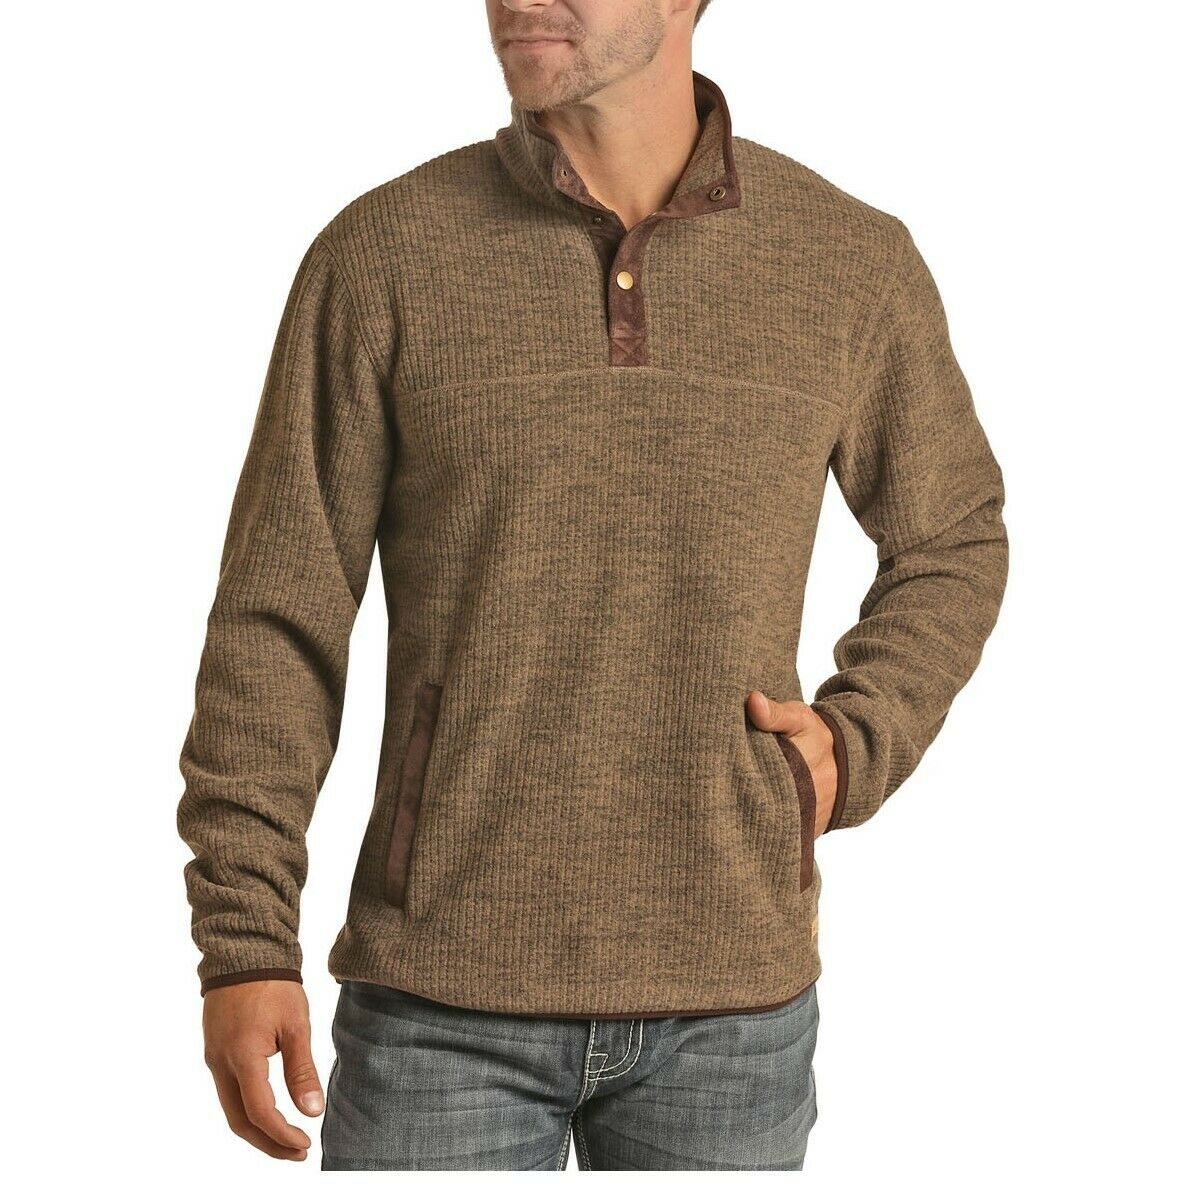 Powder River Outfitters Men's Taupe Fleece Pullover 91-6679-26